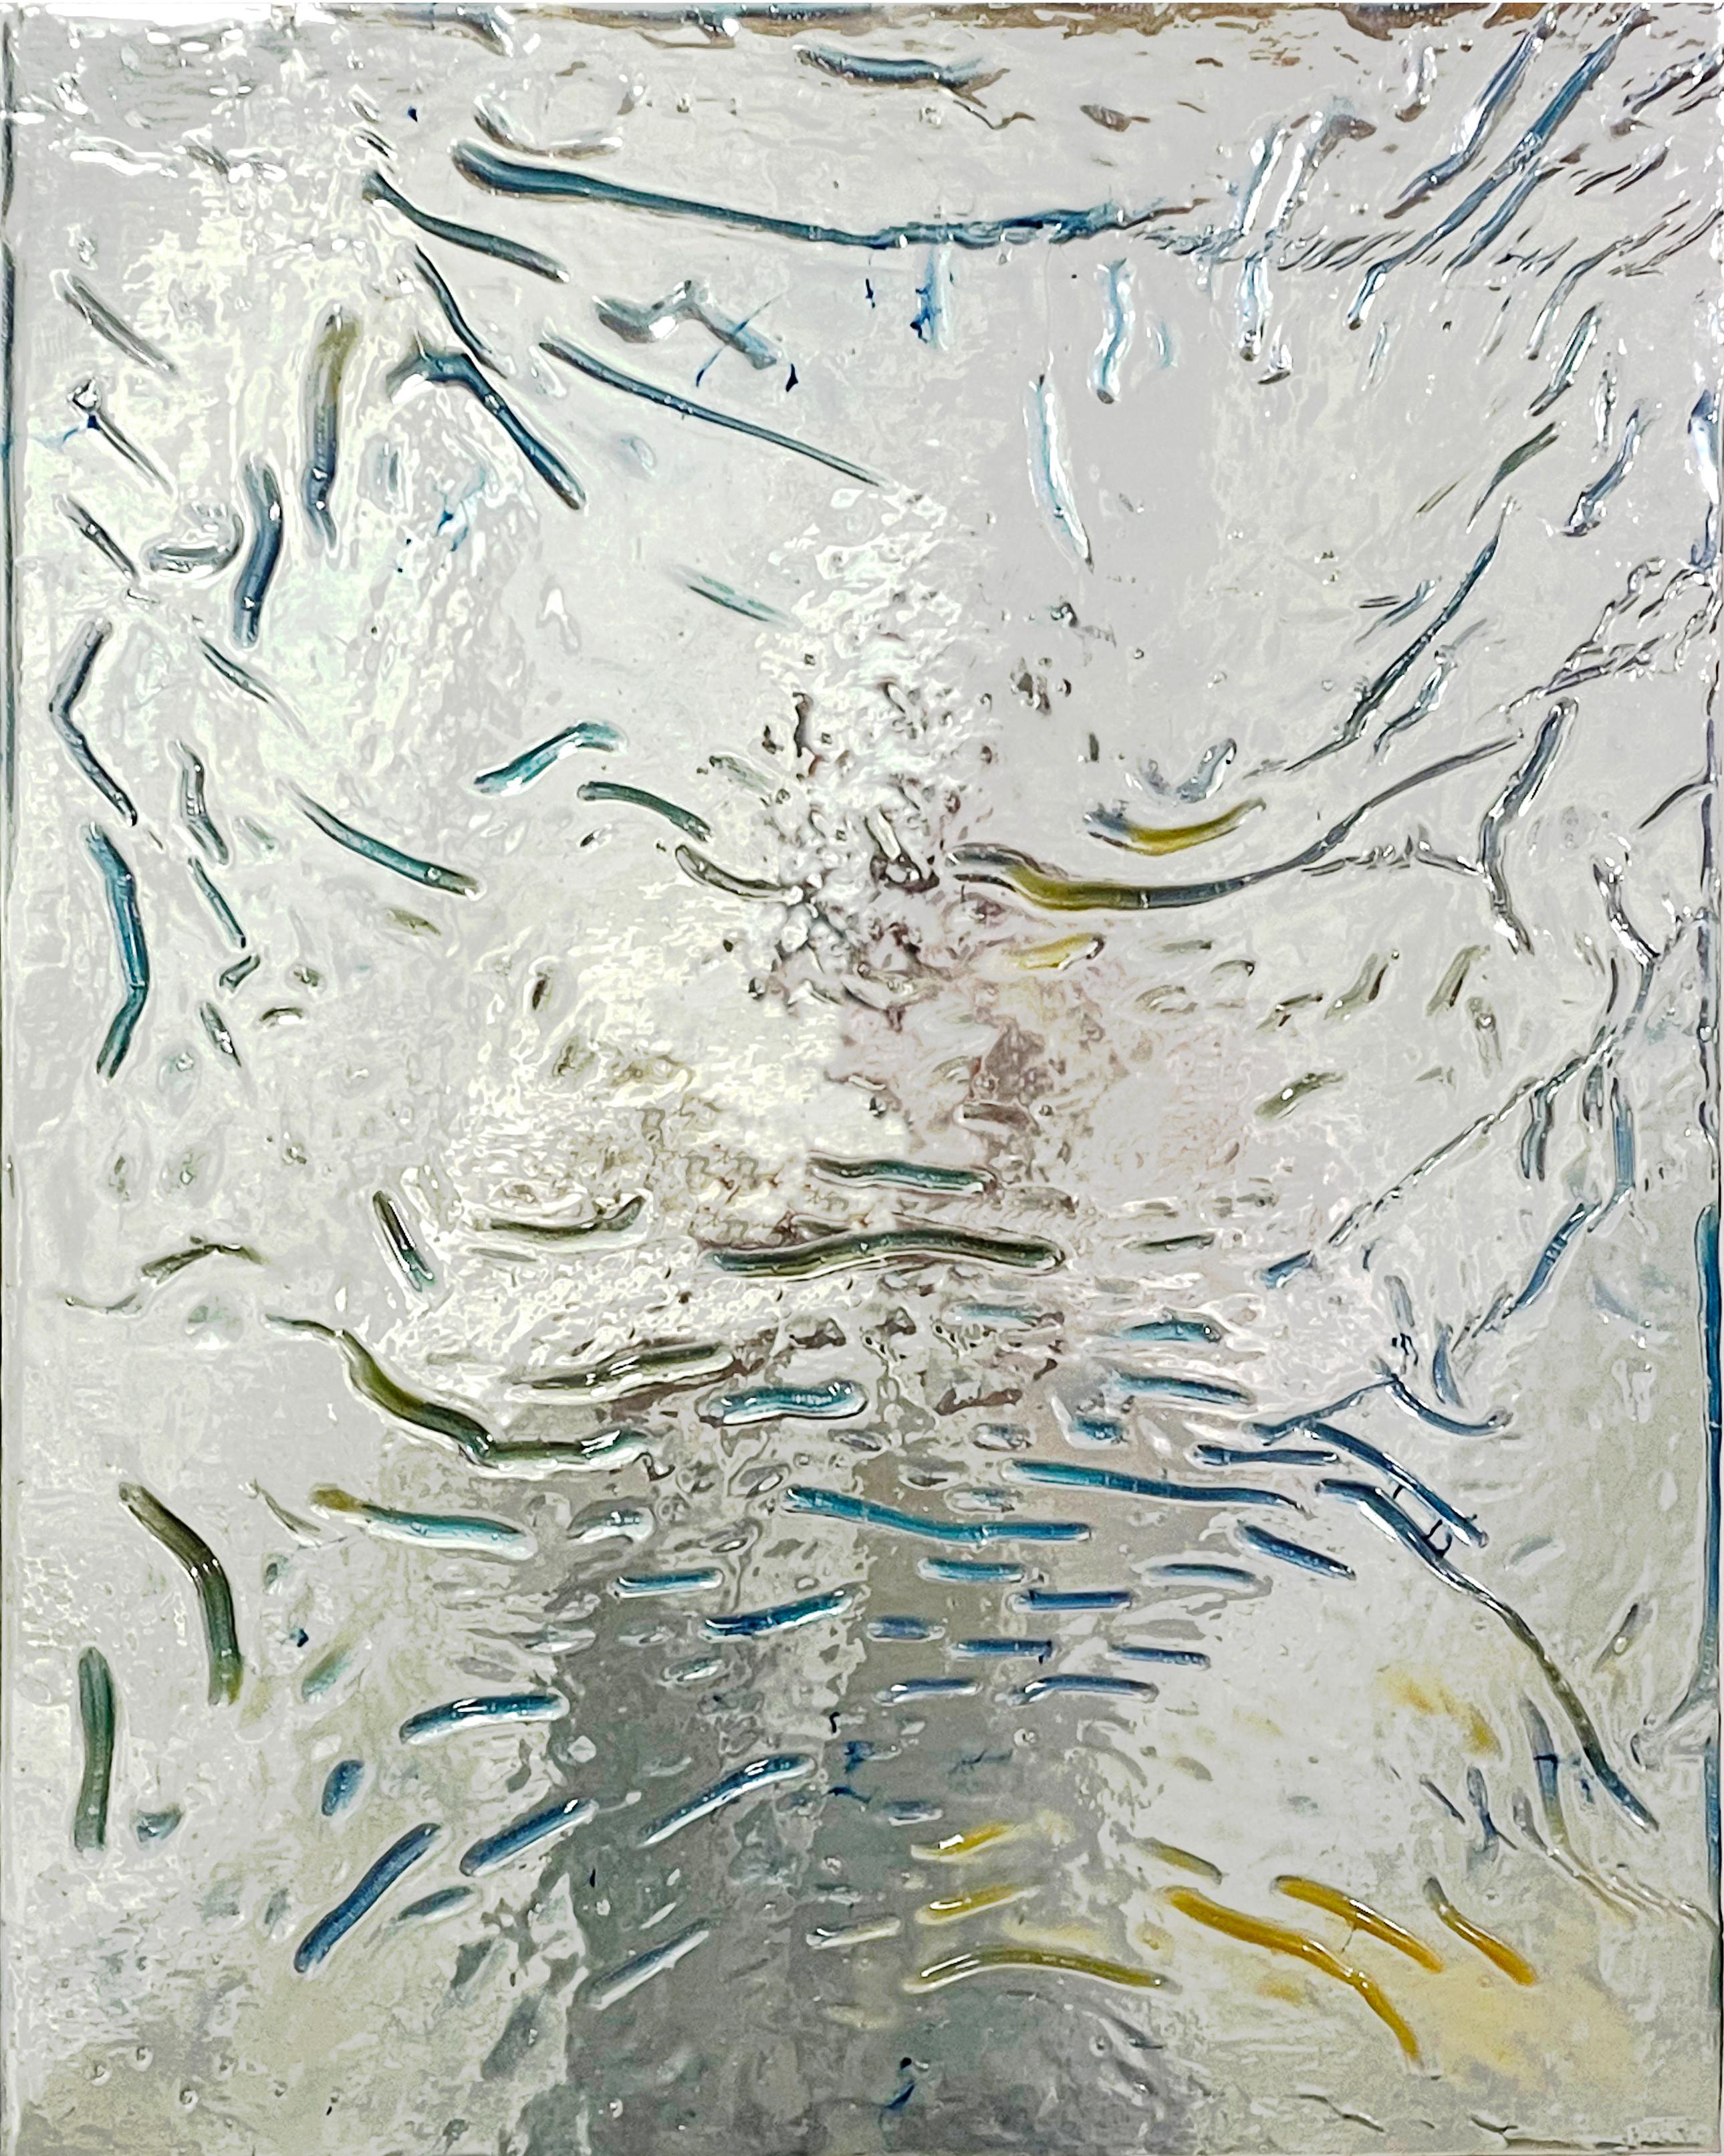 Callum Schuster Abstract Painting - AS.21.3 - contemporary abstract mirrored artwork on panel, blue, green, silver